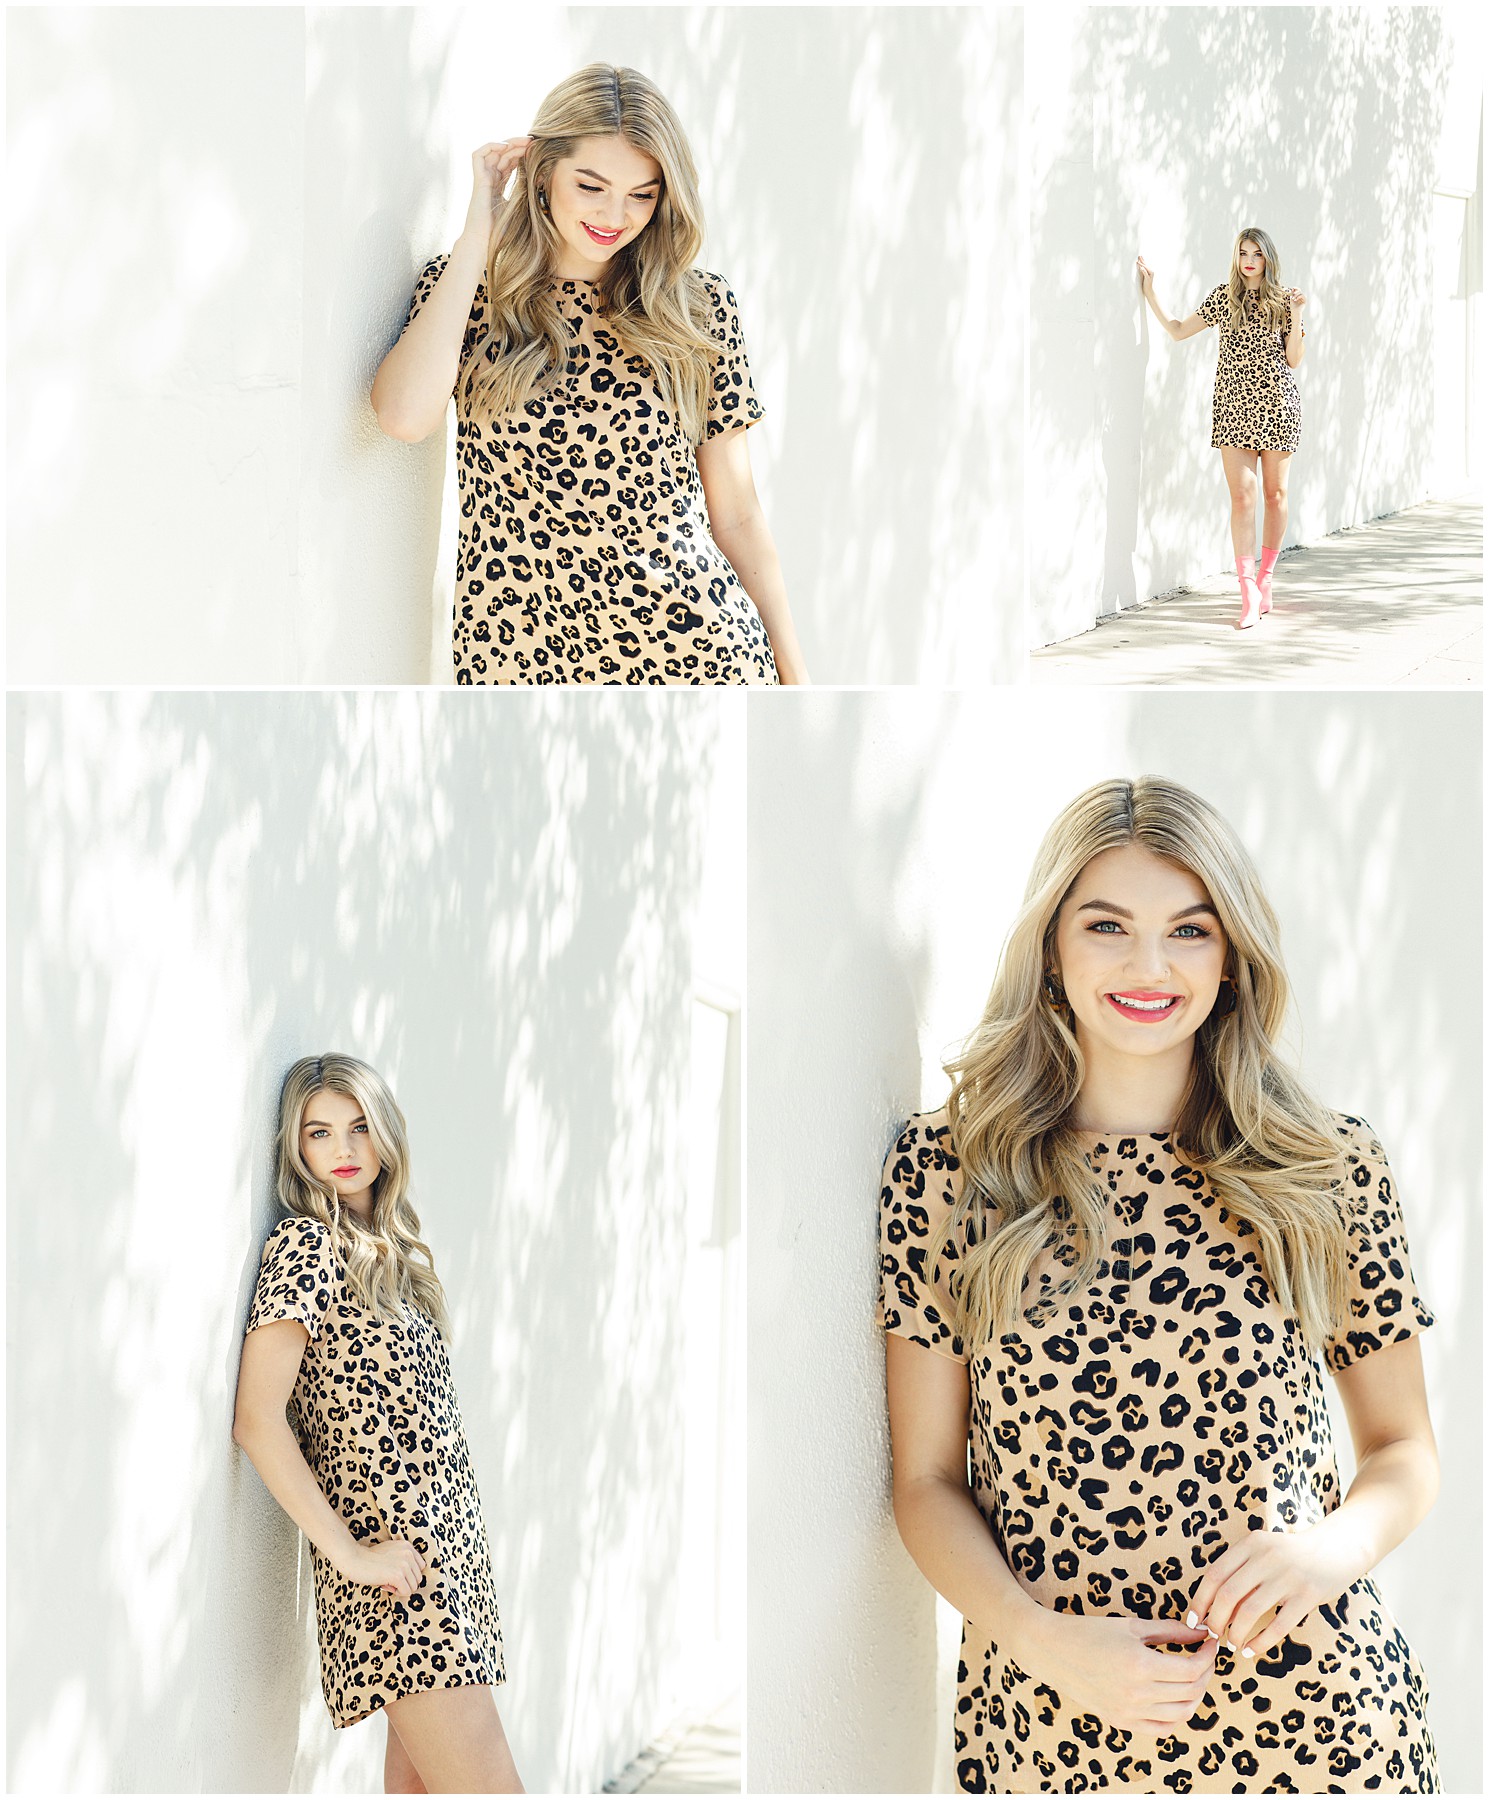 professional senior photogrpaher cheetah dress outfit ideas in los angeles